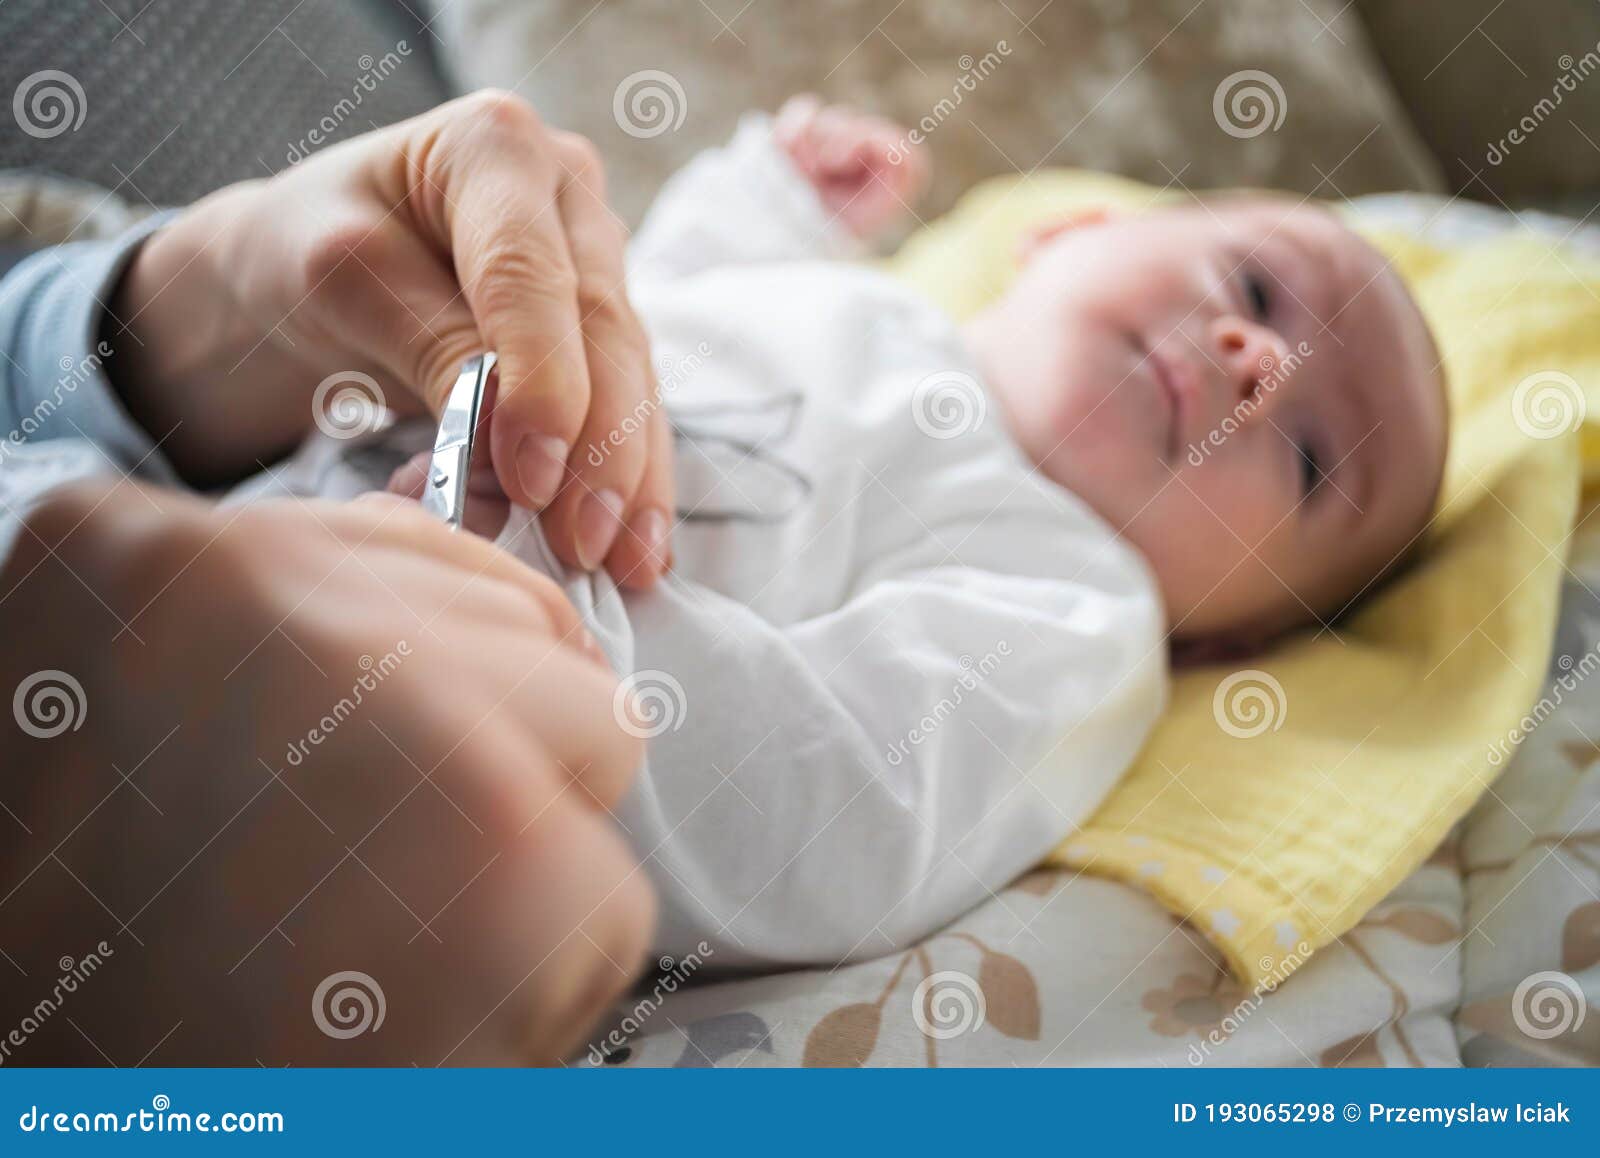 mother trimming newborns nails on a bed